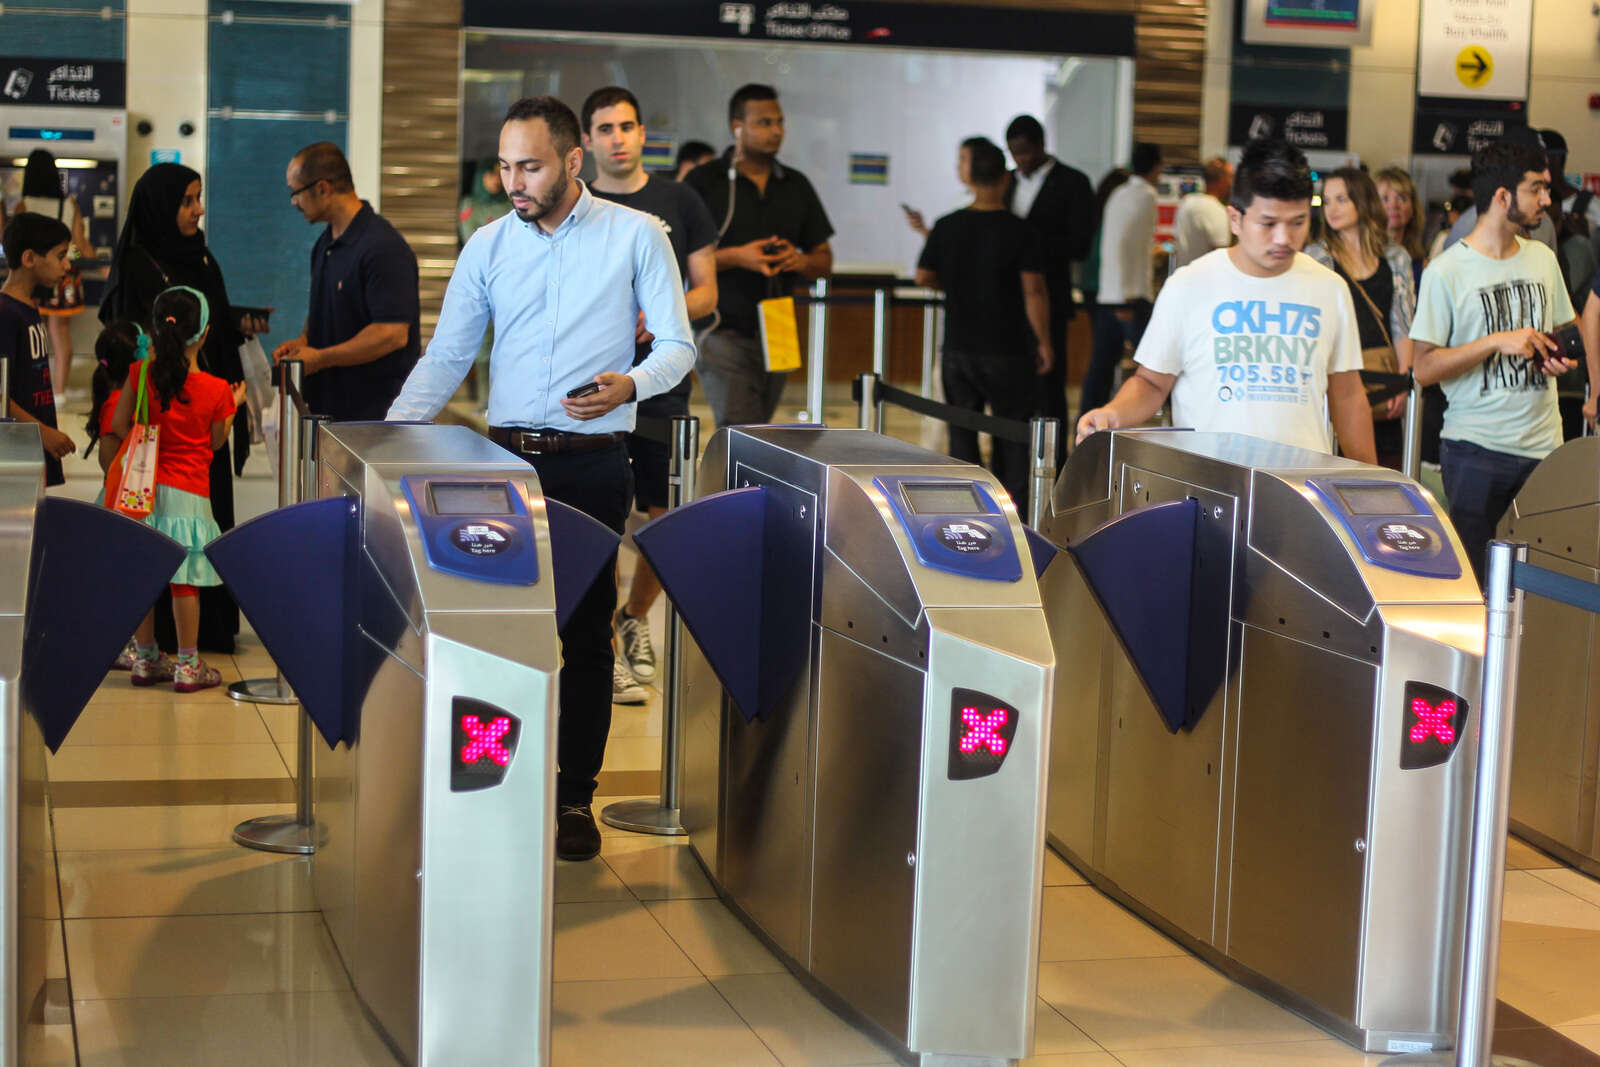 up to dh2,000 fine: 31 dubai metro violations that will get passengers penalties